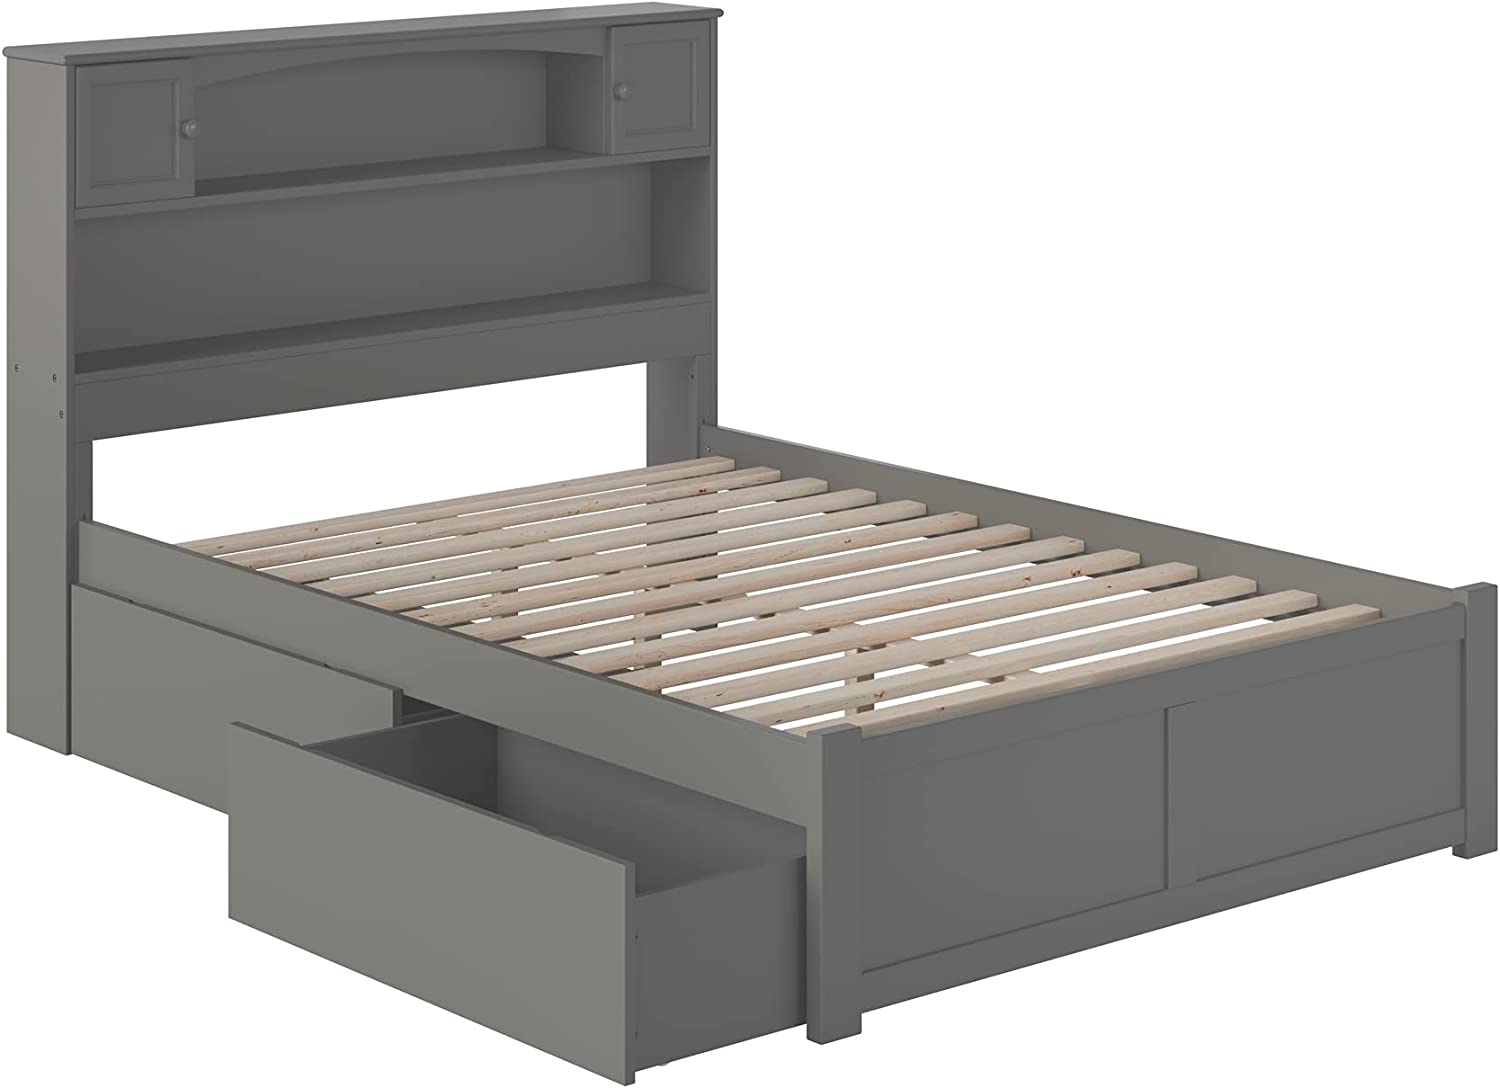 AFI Newport Platform Flat Panel Footboard and Turbo Charger with Urban Bed Drawers, Full, Grey